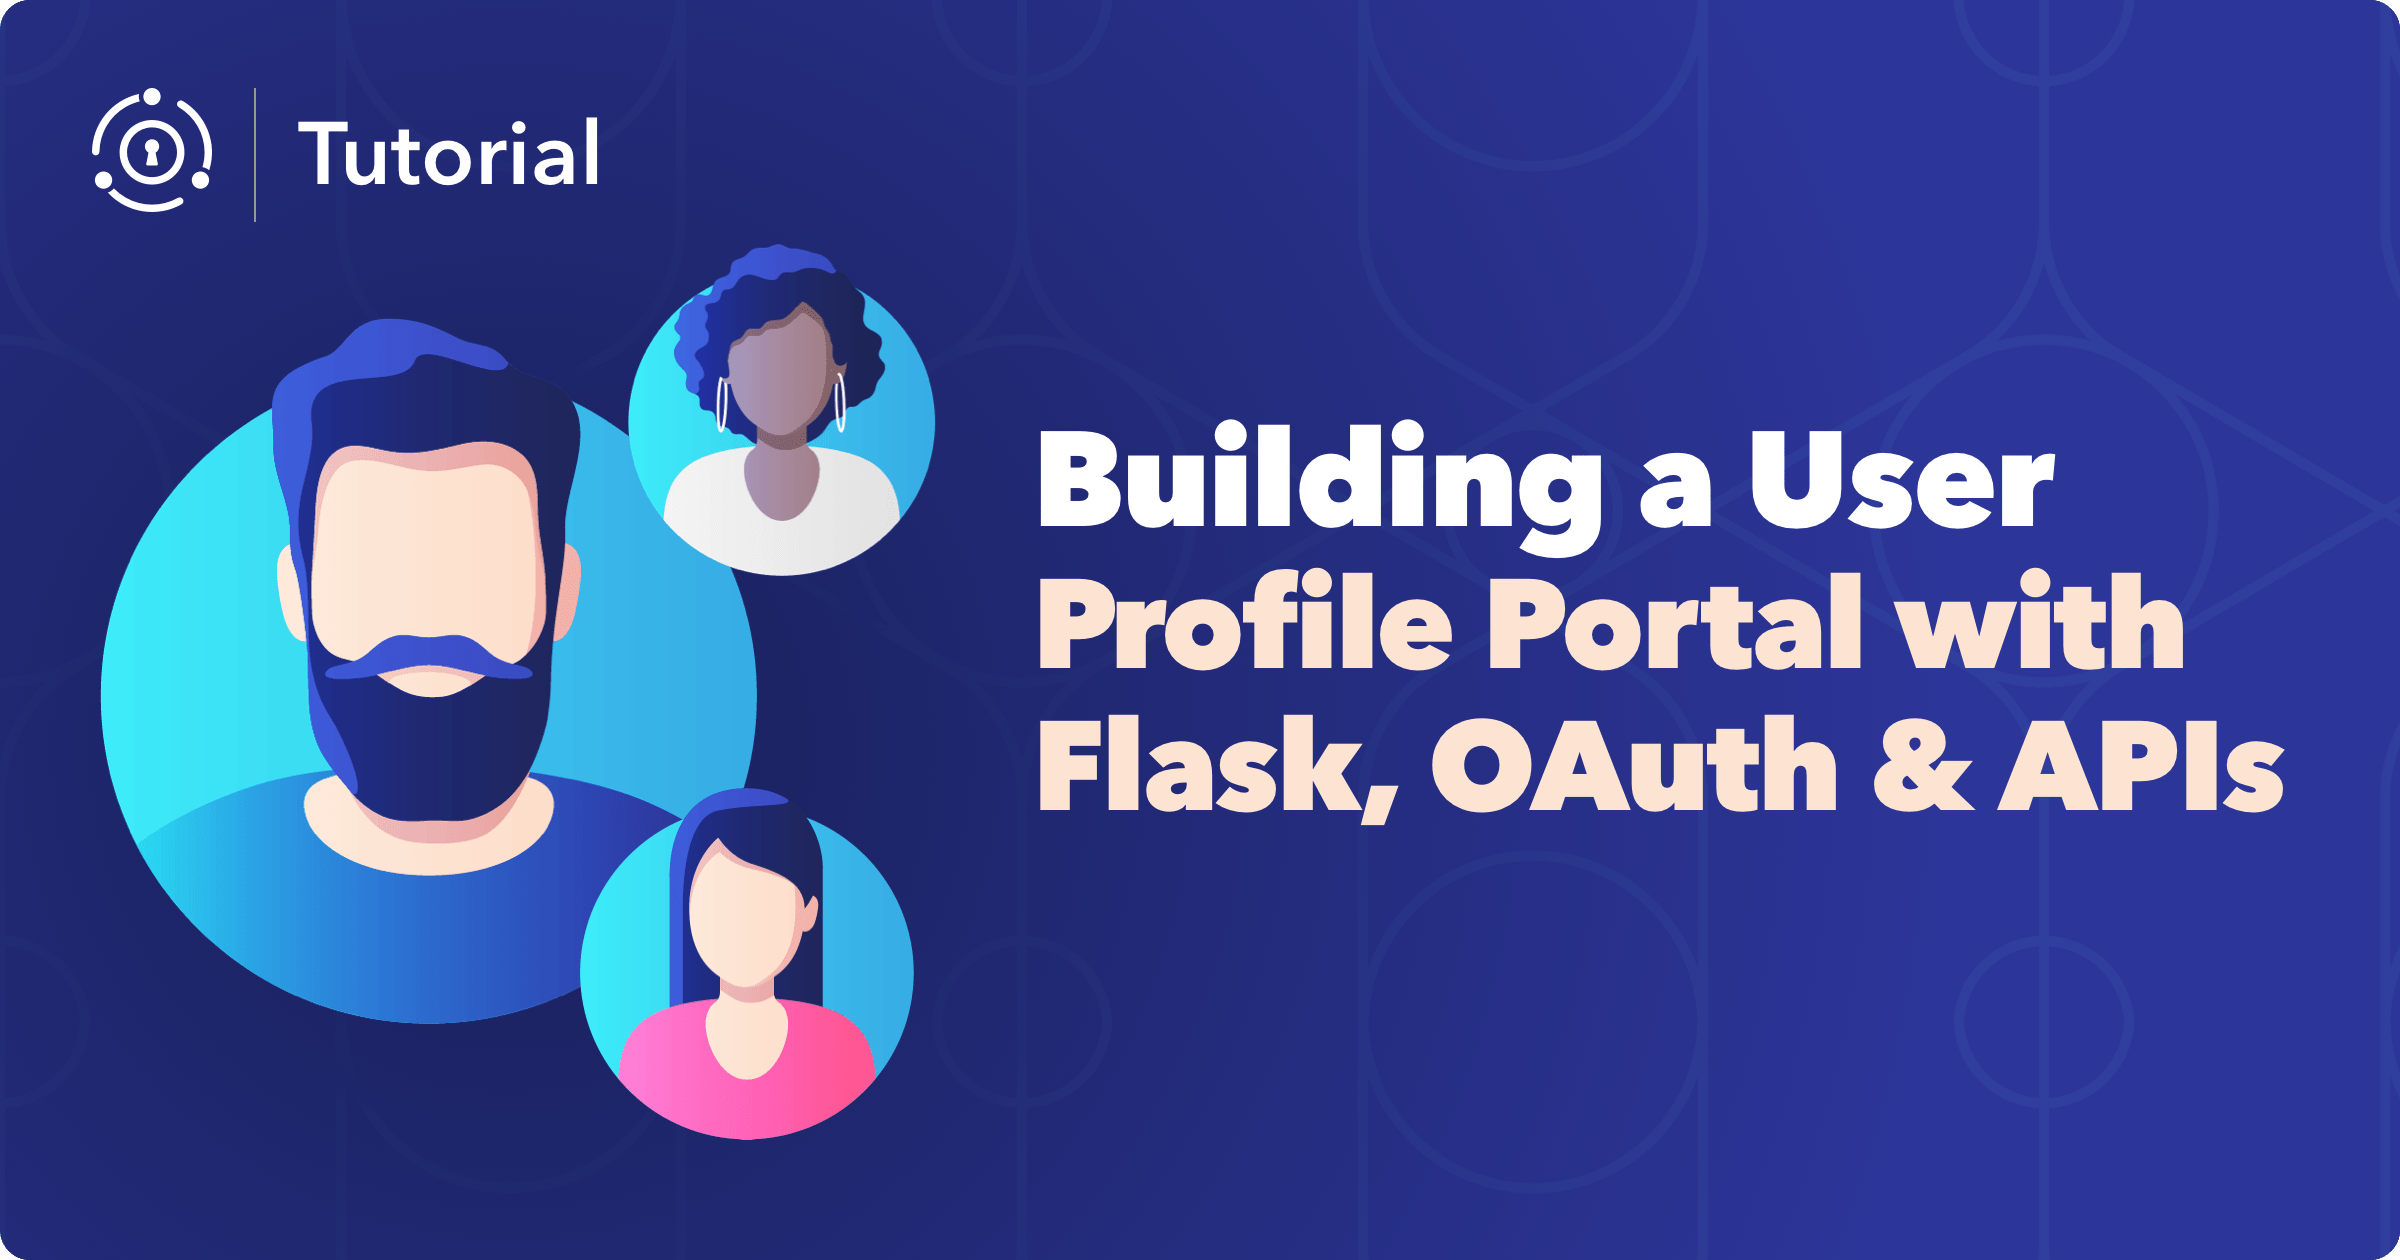 Building a user profile portal with Flask, OAuth, and APIs